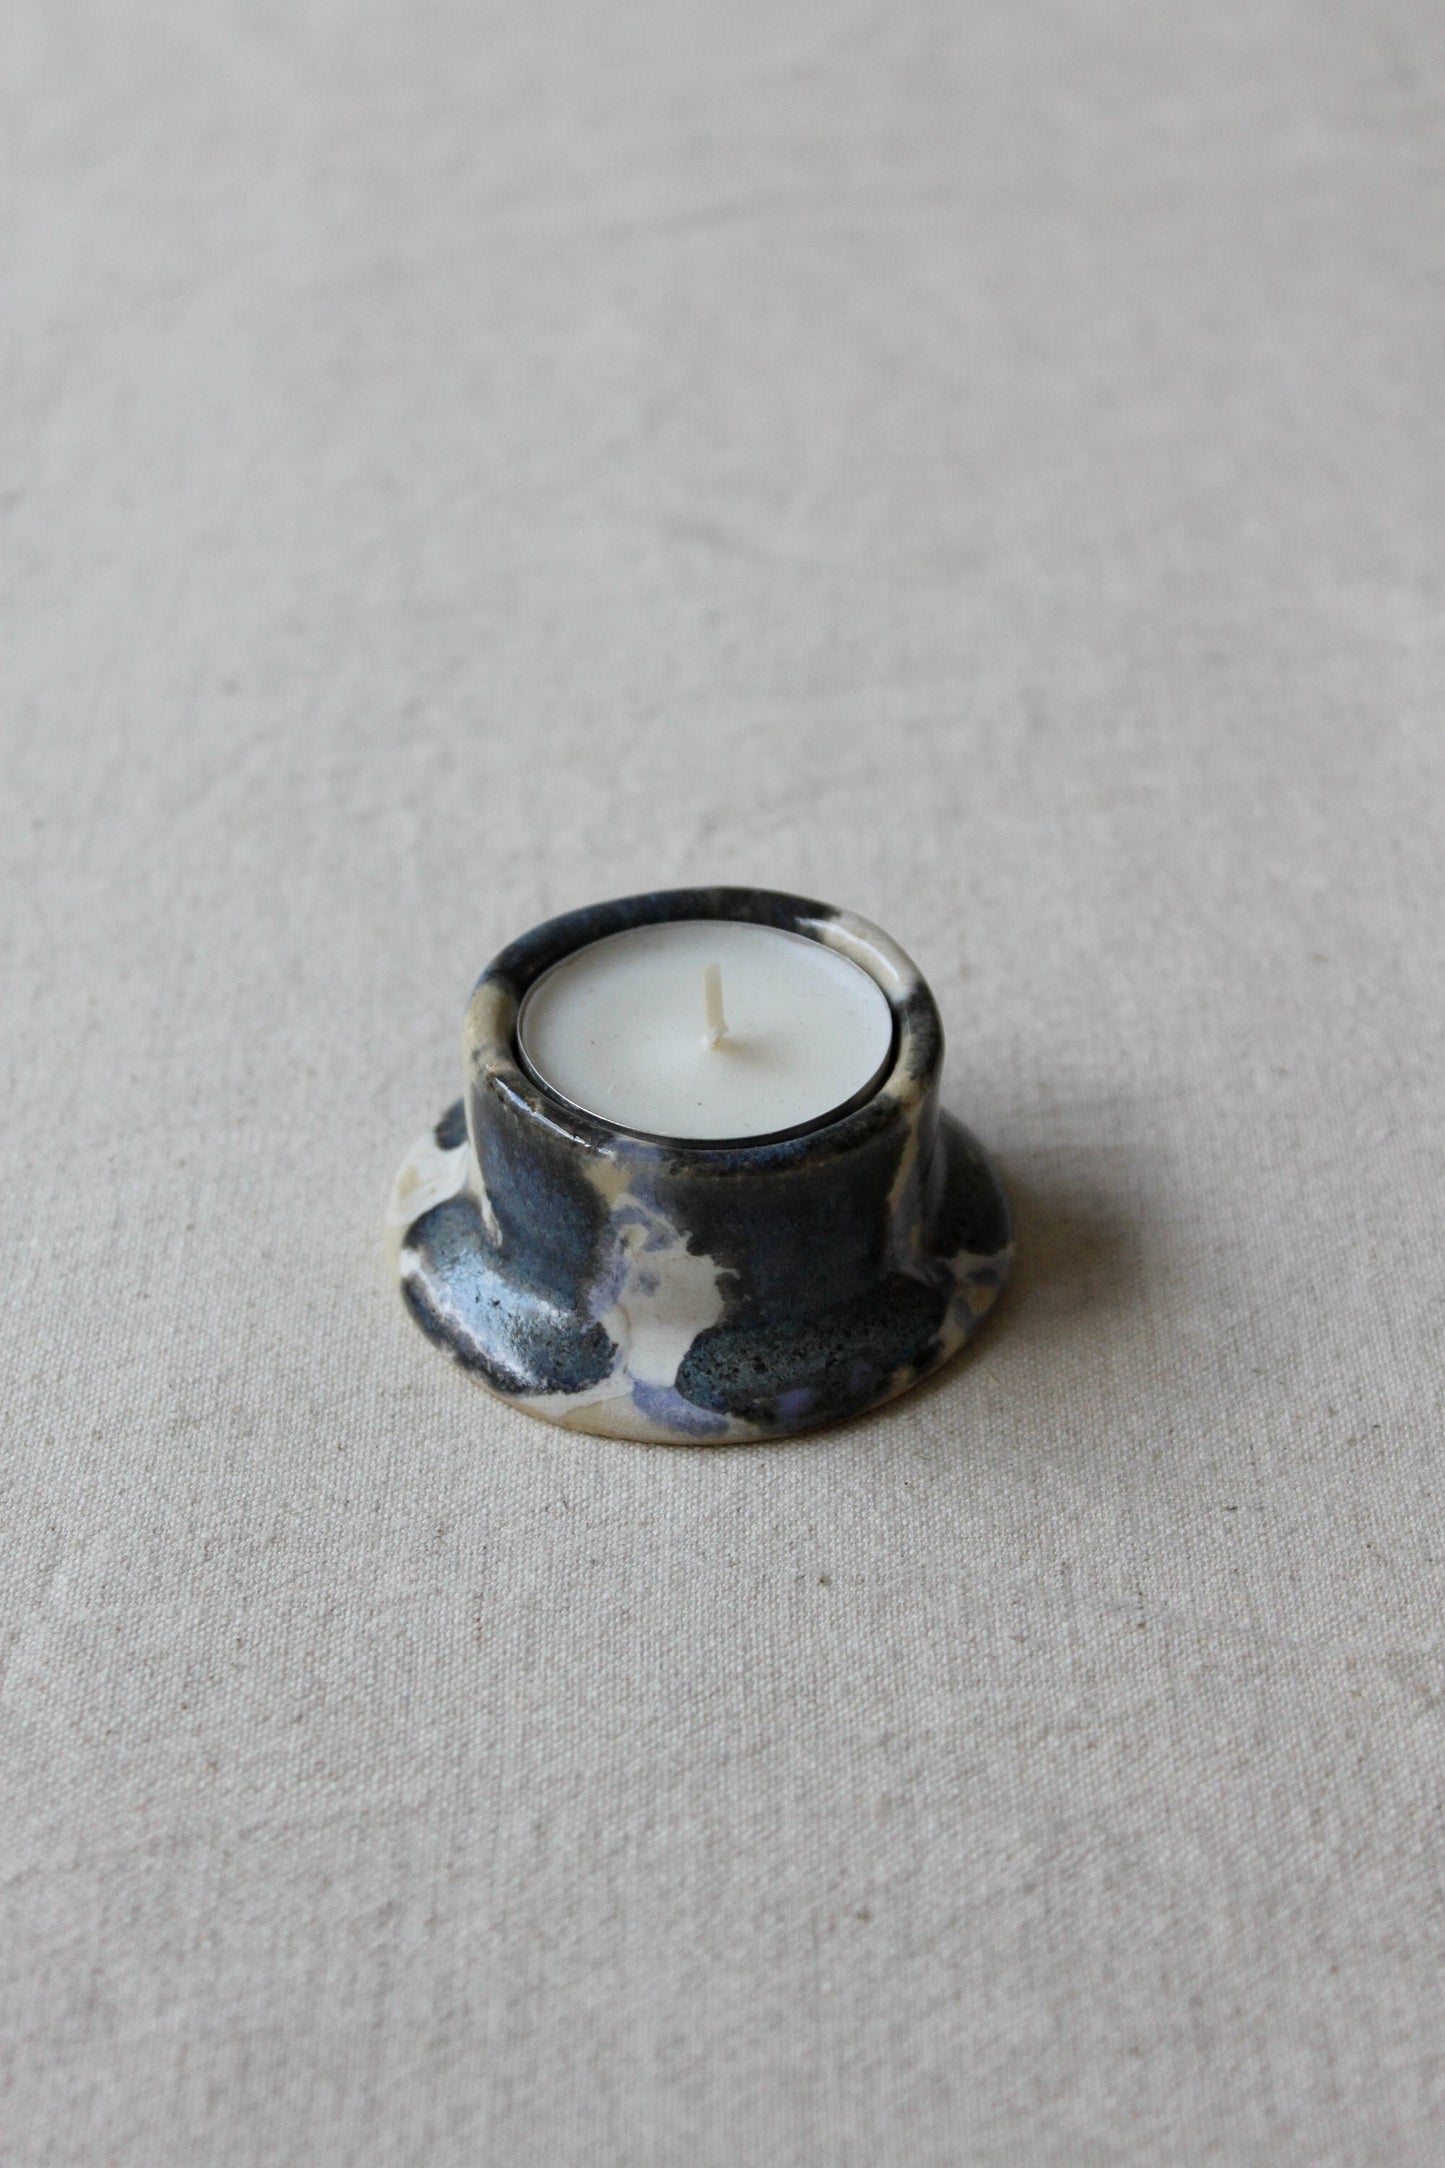 Special Edition Ceramic Tealight Candle Holder in Mottled Blue